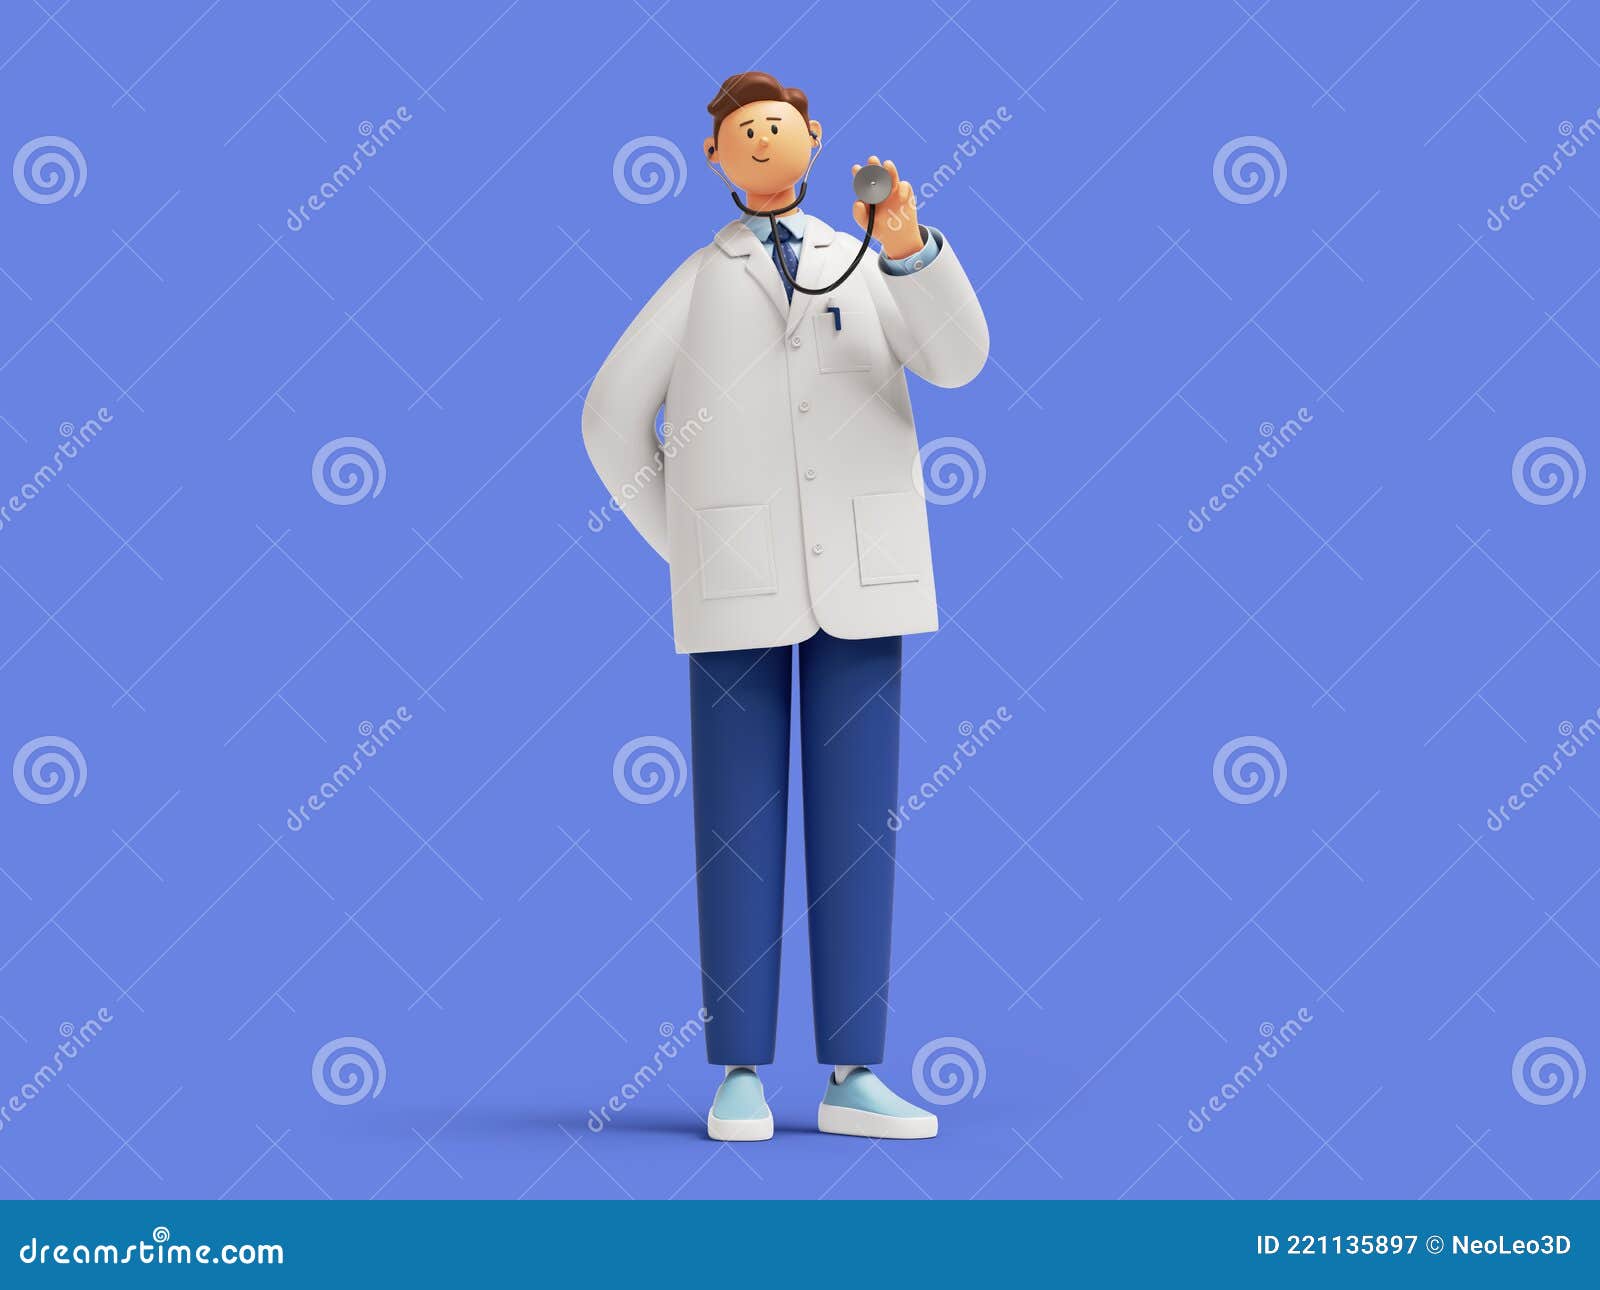 Blue Haired Doctor Cartoon Character - wide 9